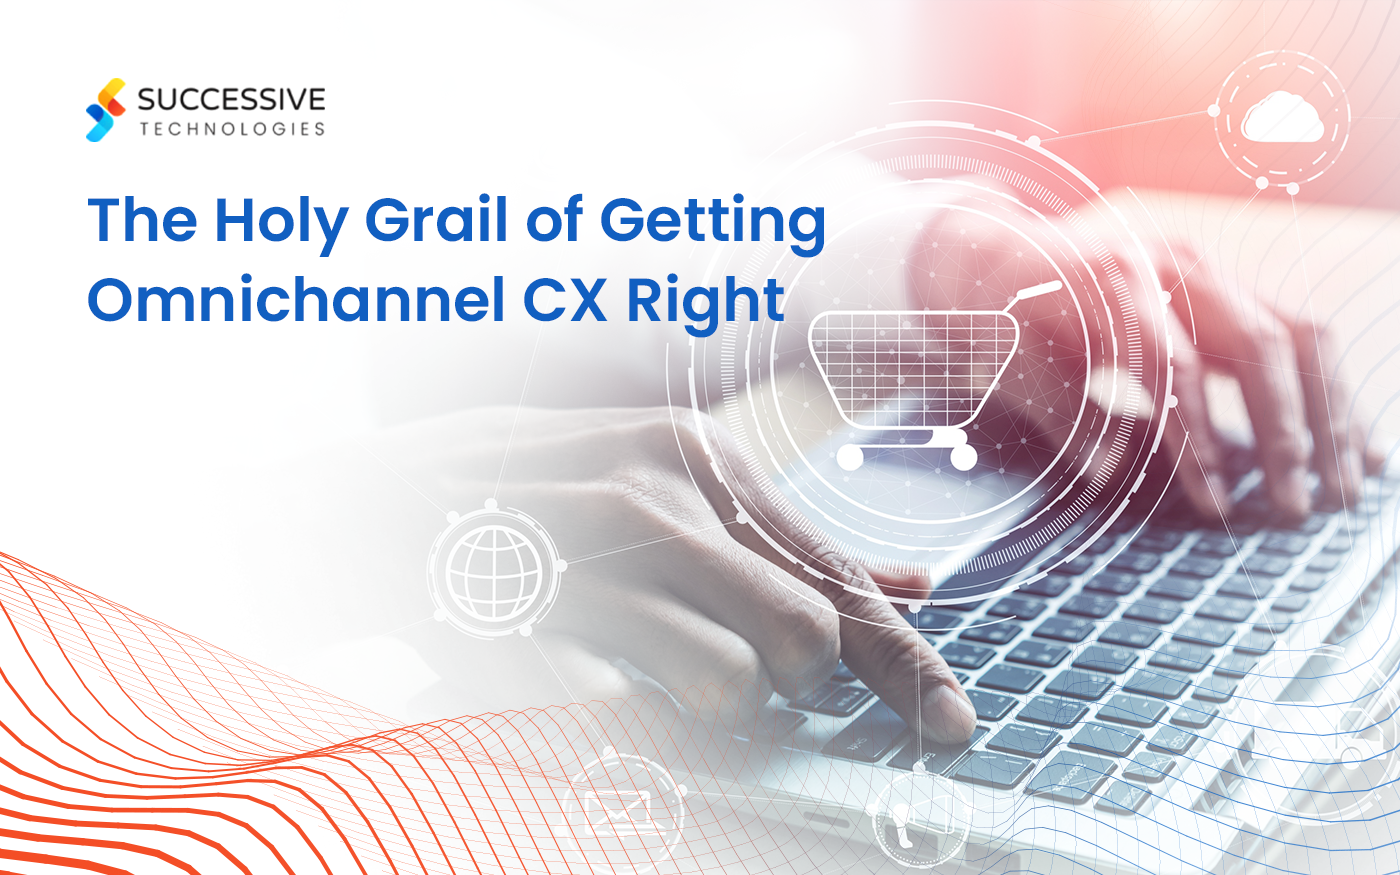 The Holy Grail of Getting Omnichannel CX Right